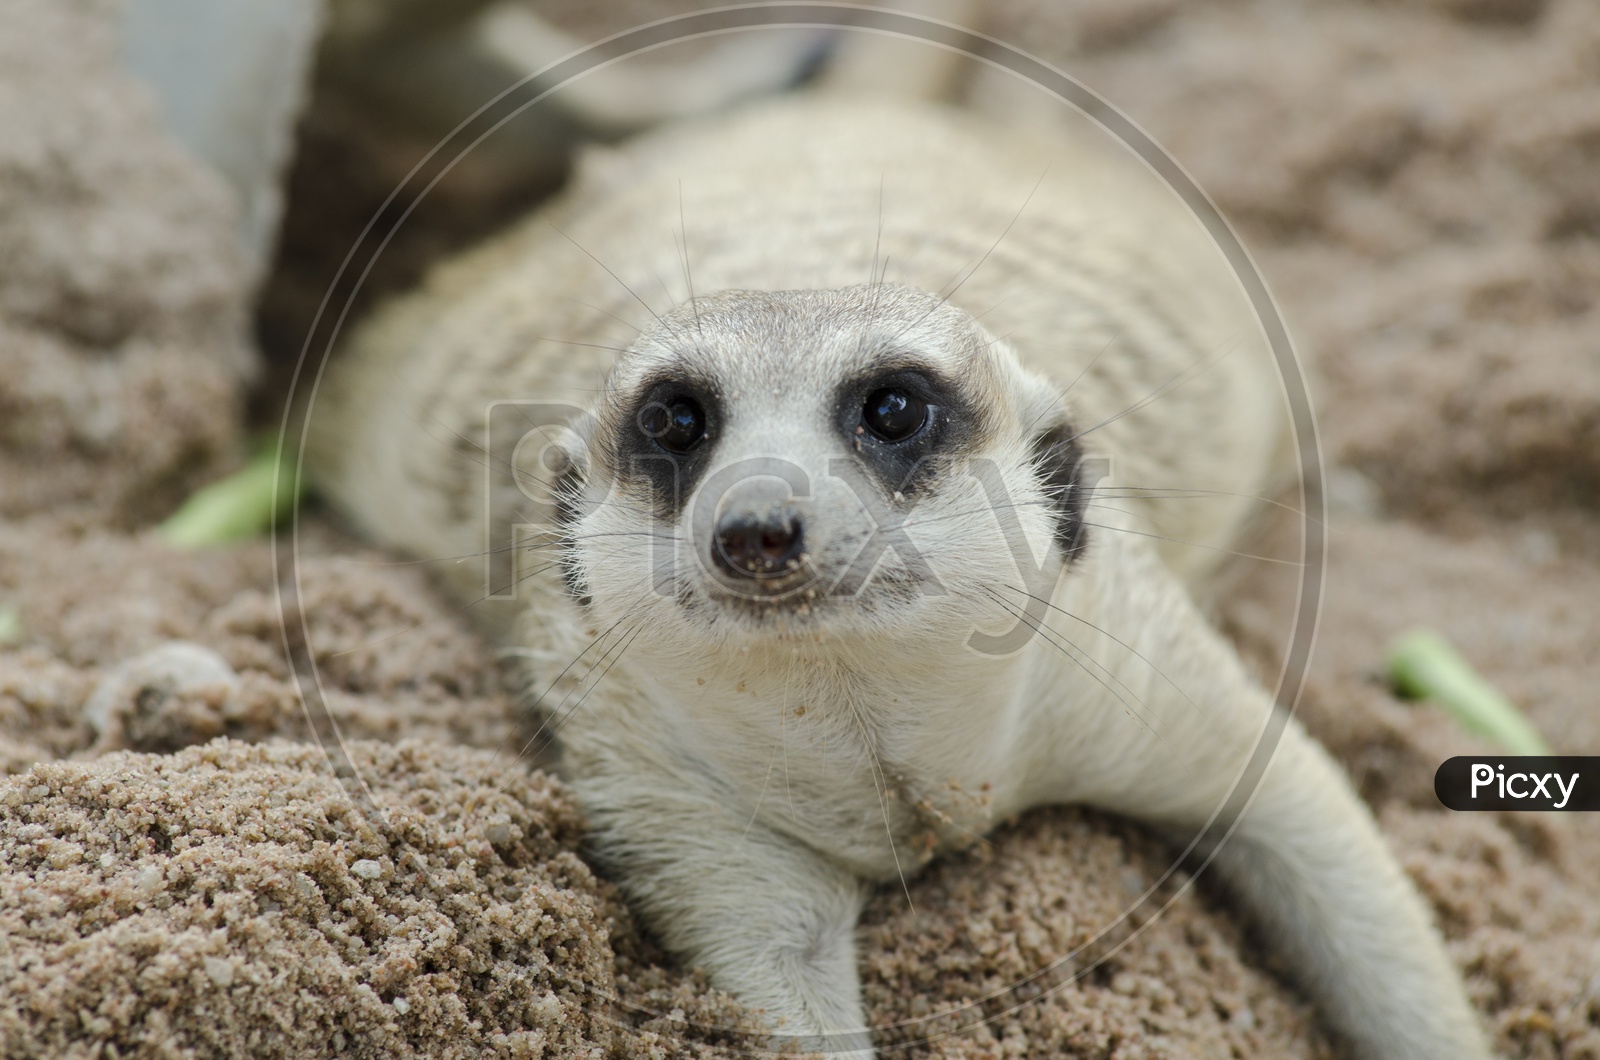 Expression of a Meerkat or Suricate or Suricata in a Zoo